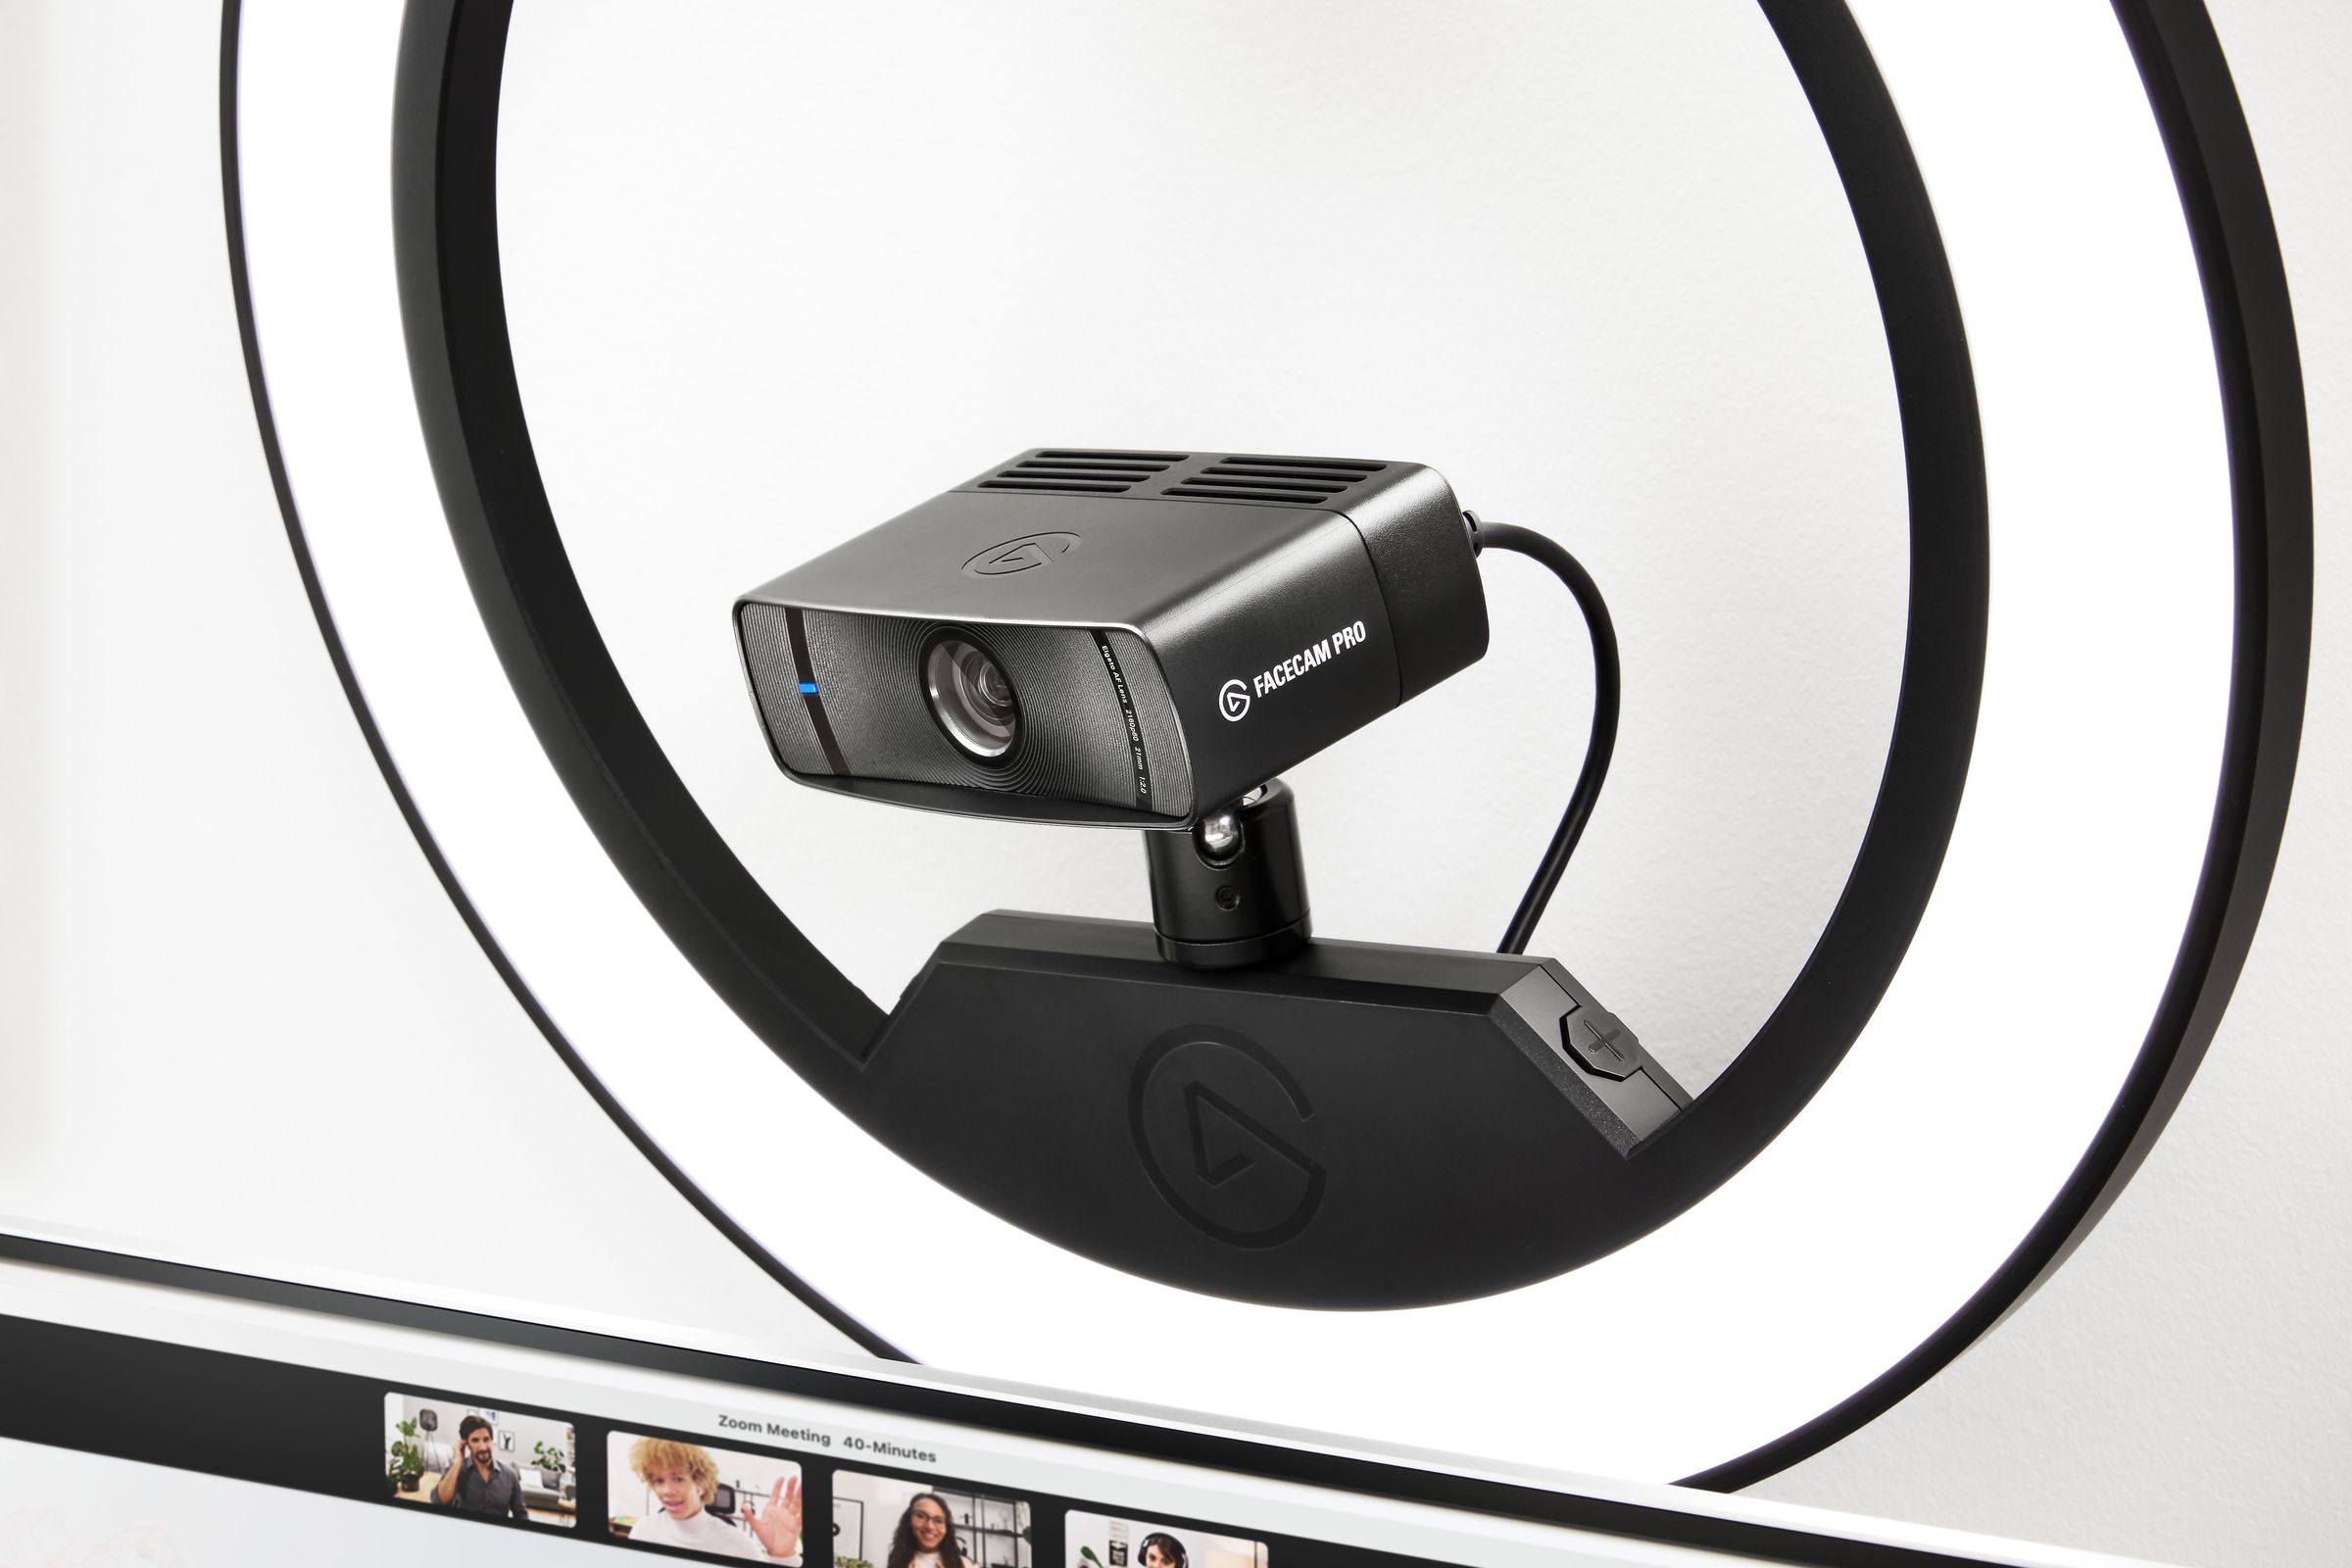 The Elgato Facecam Pro sits on top of a ring light mount, aimed at a user who is on a Zoom video call.